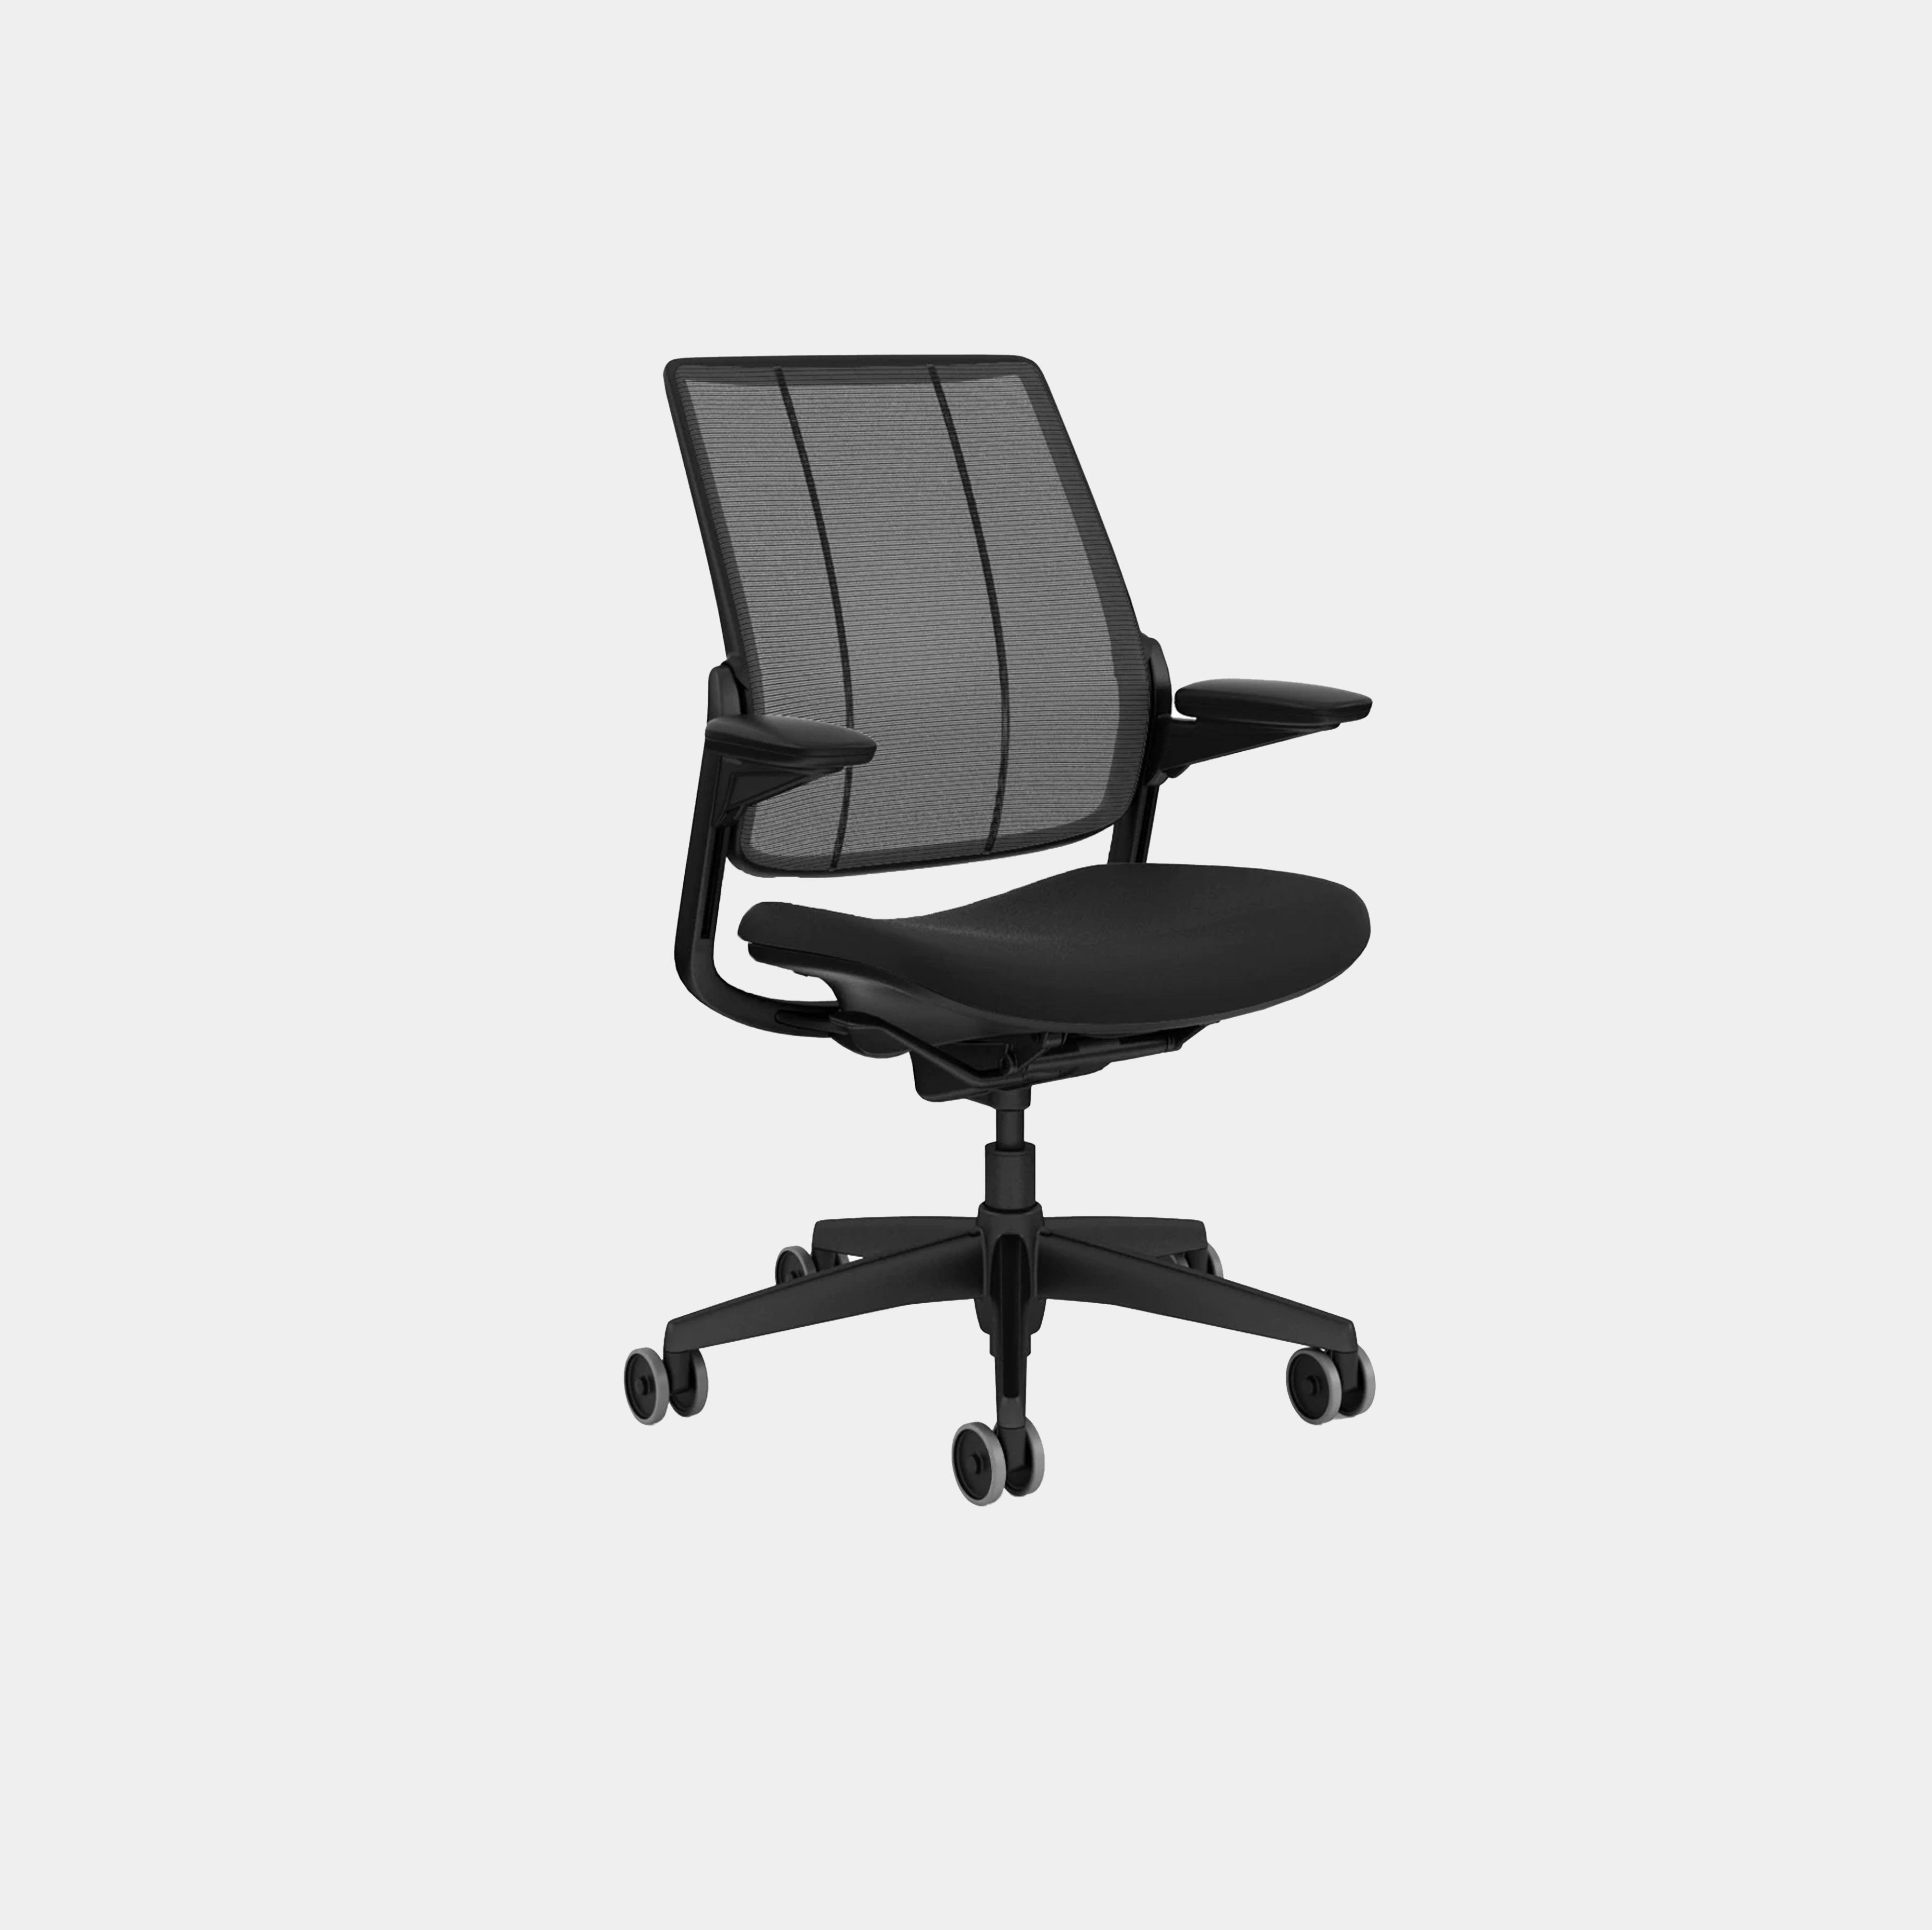 'Humanscale' Diffrient Smart task chair